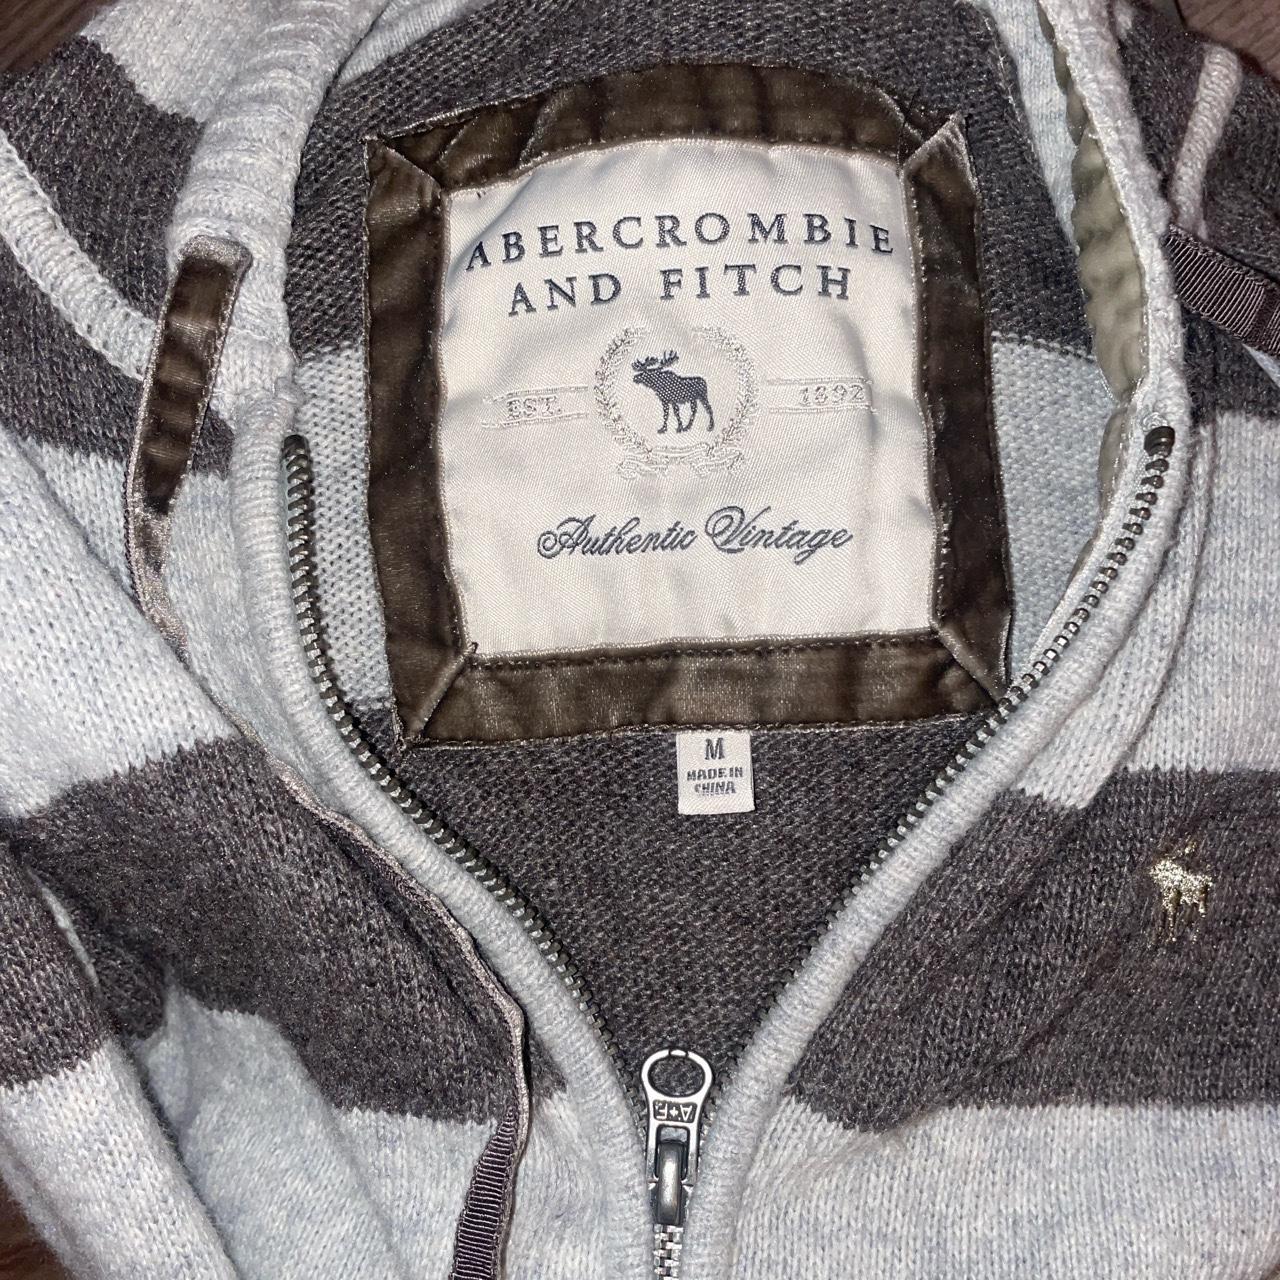 Early 2000s Abercrombie and Fitch double zip jacket.... - Depop